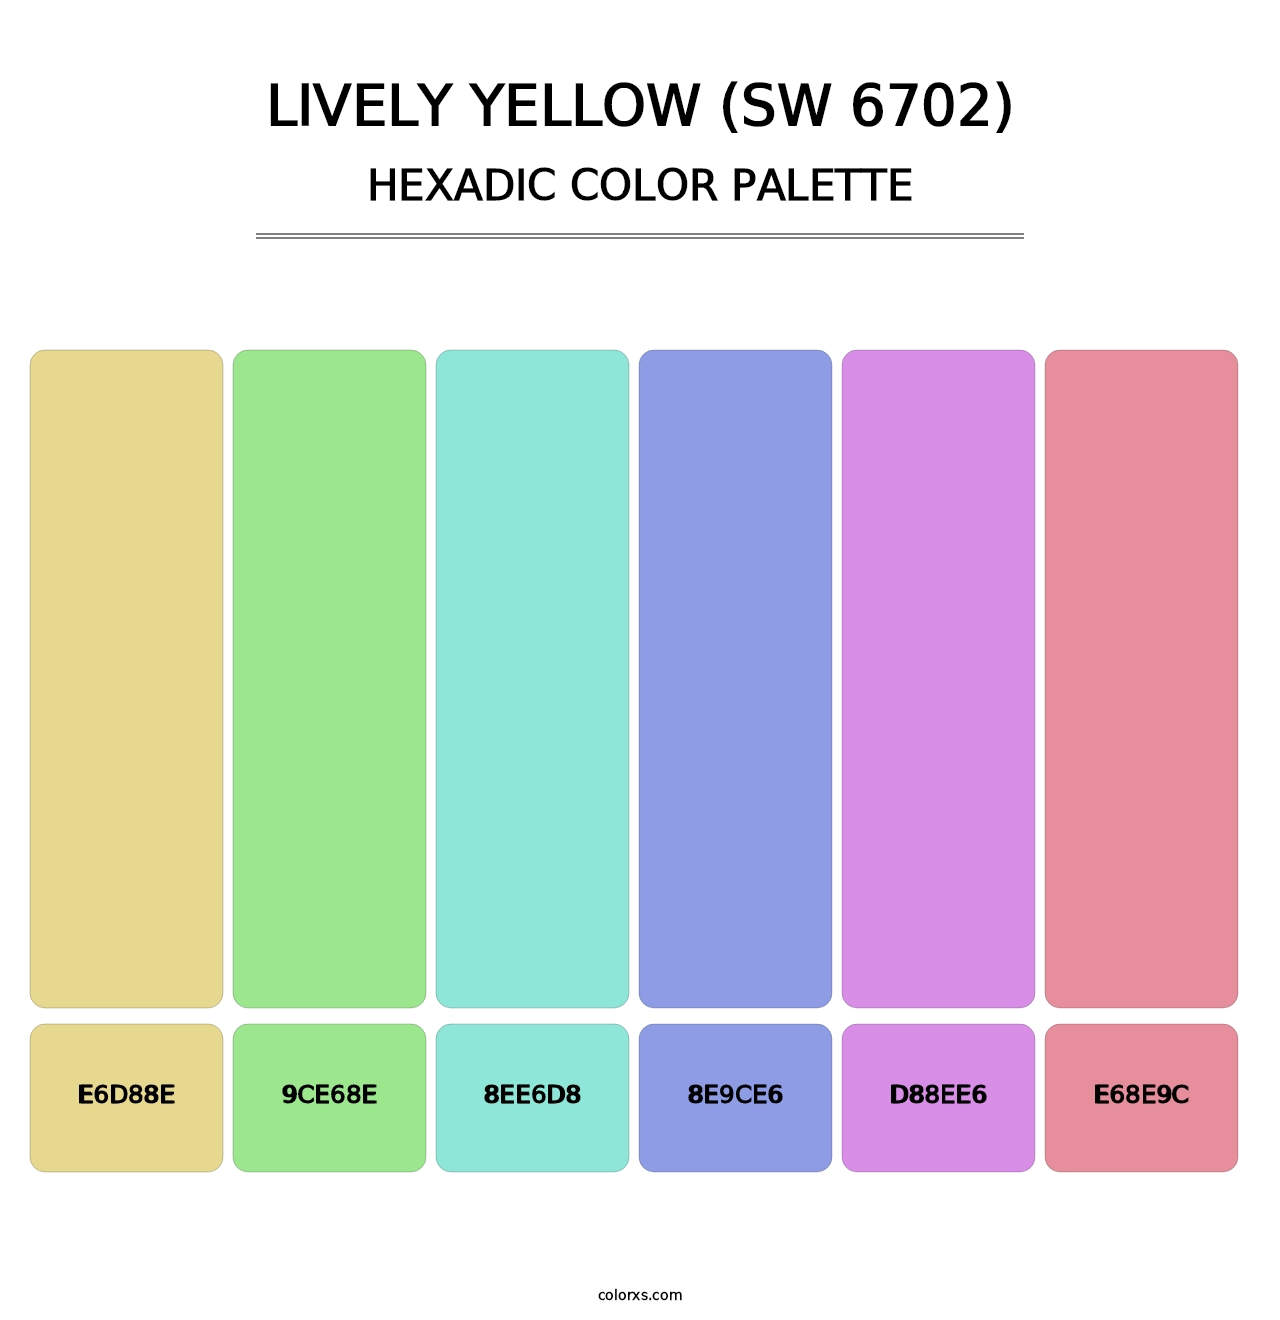 Lively Yellow (SW 6702) - Hexadic Color Palette